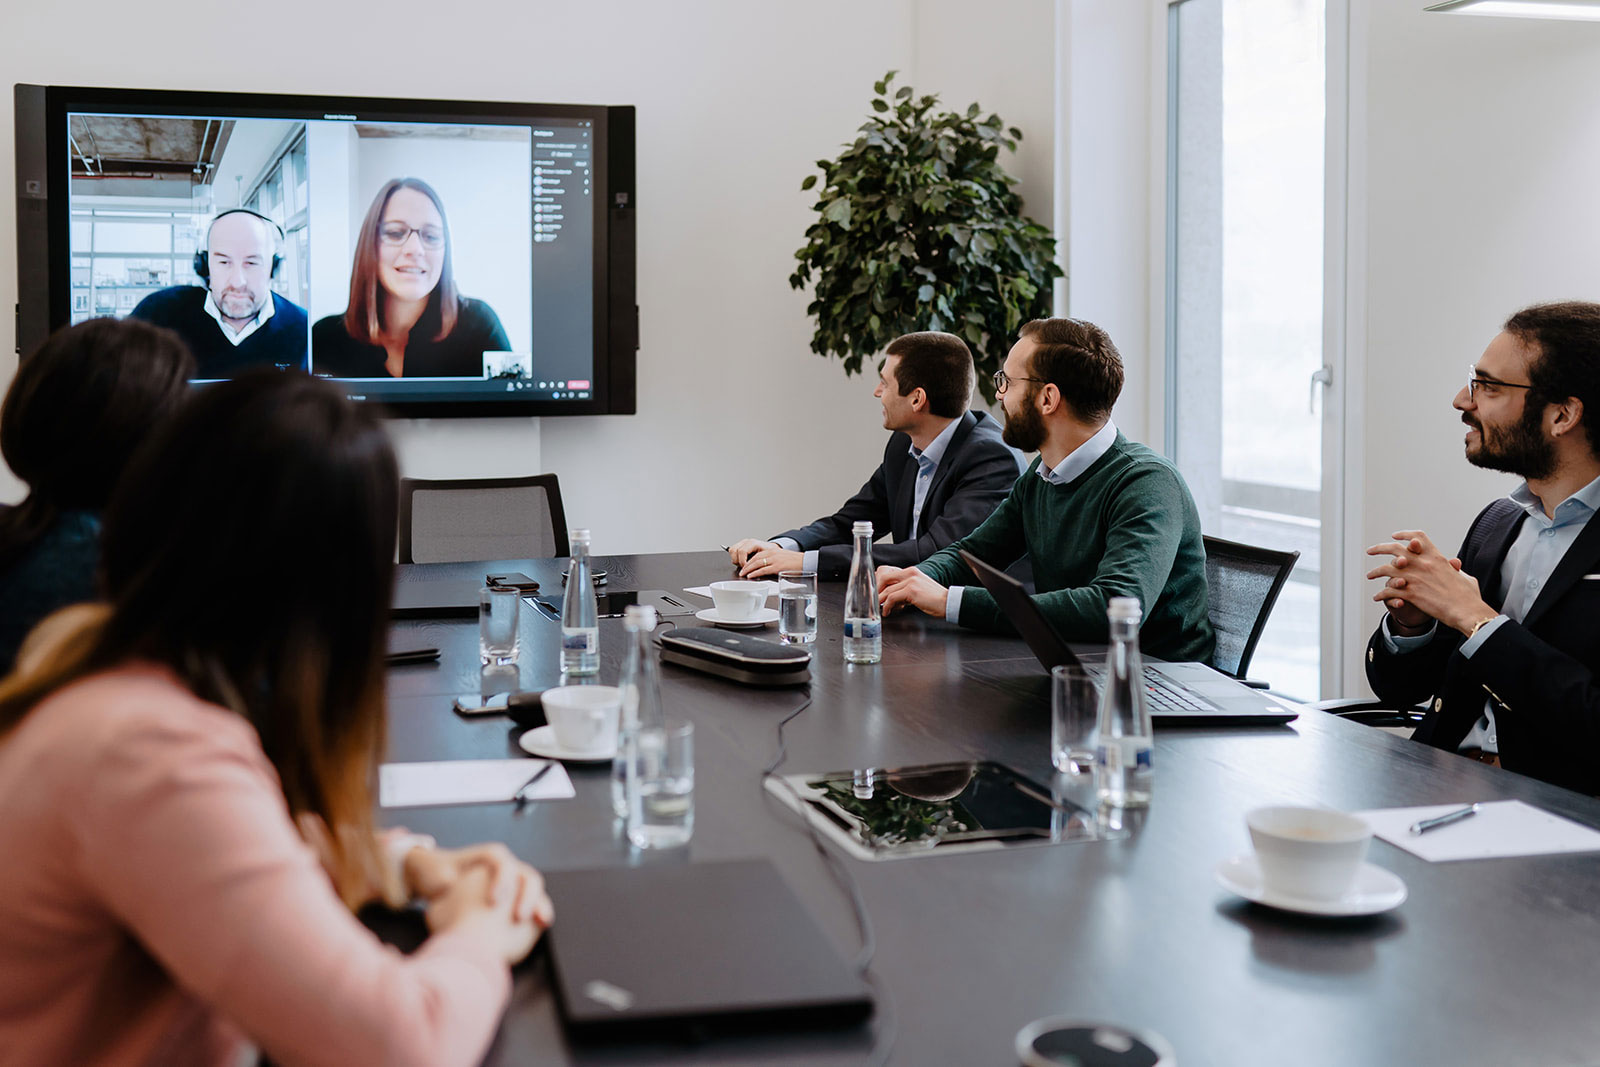 A meeting in the office with staff on video call